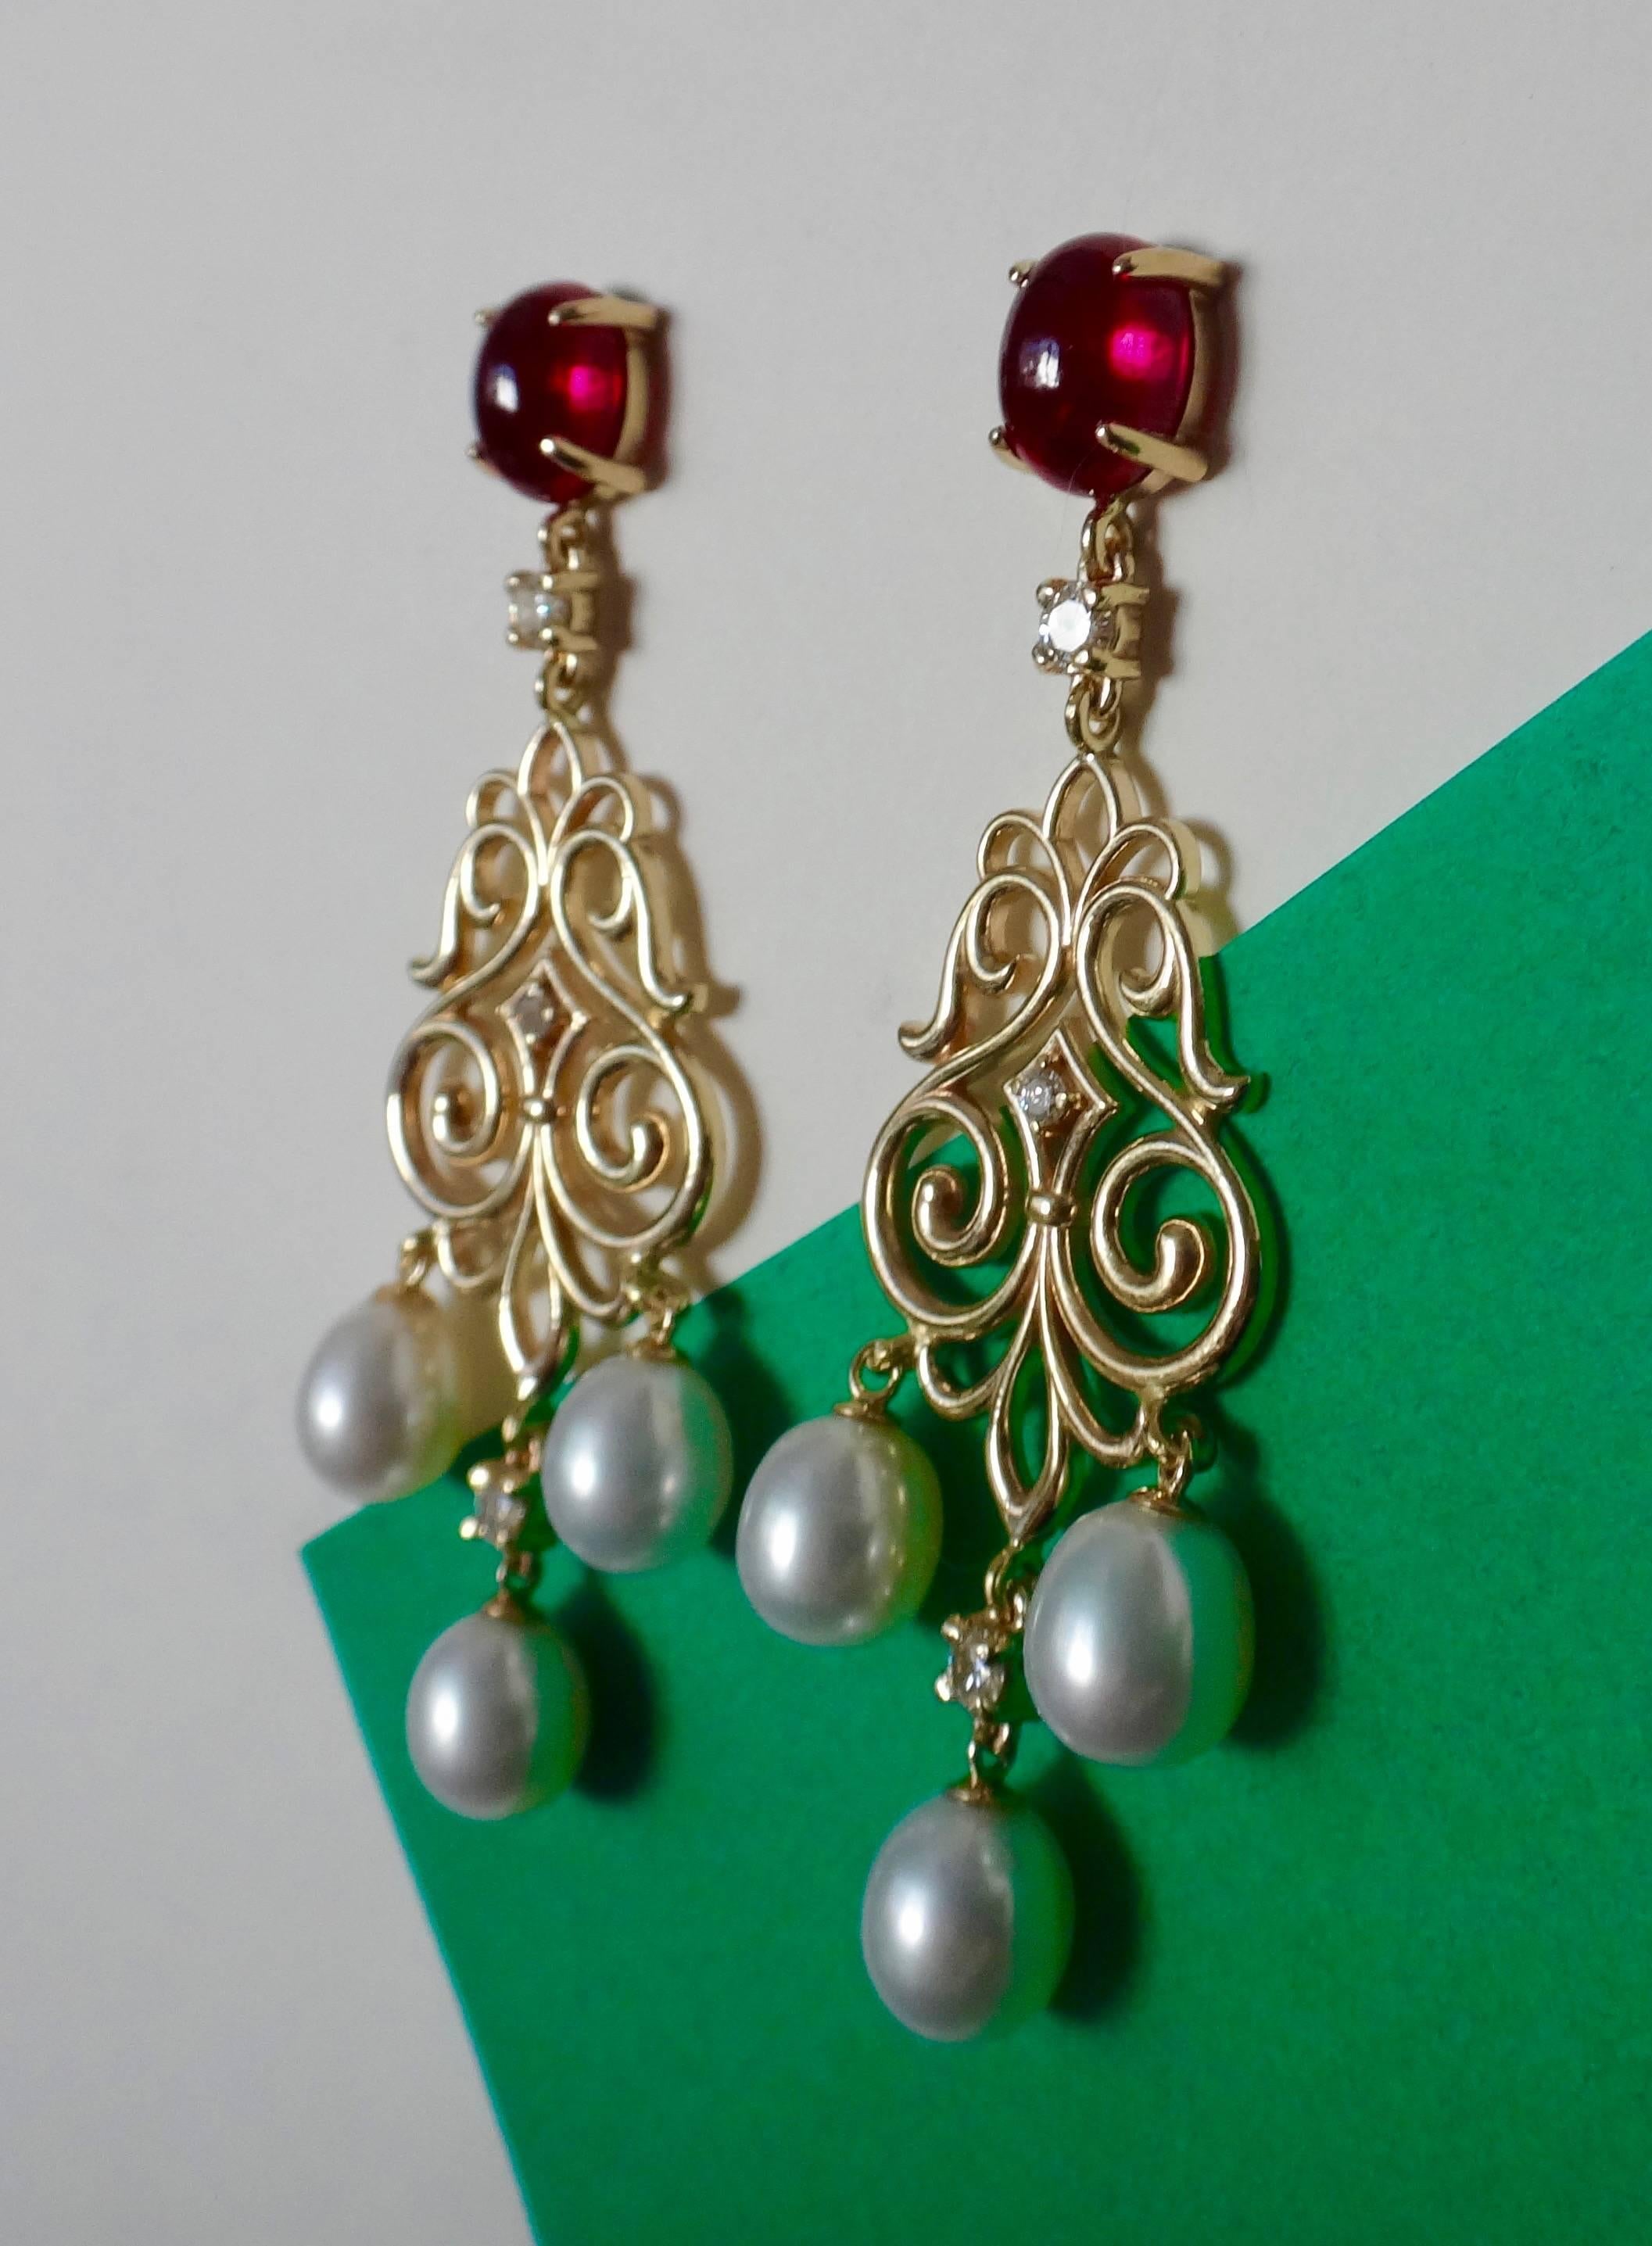 A pair of very fine cabochon rubellite tourmalines with beautiful red color and superb polish are combines with brilliant cut white diamonds and pear shaped white cultured pearls in these filagree dangle earrings. The earrings come with posts and